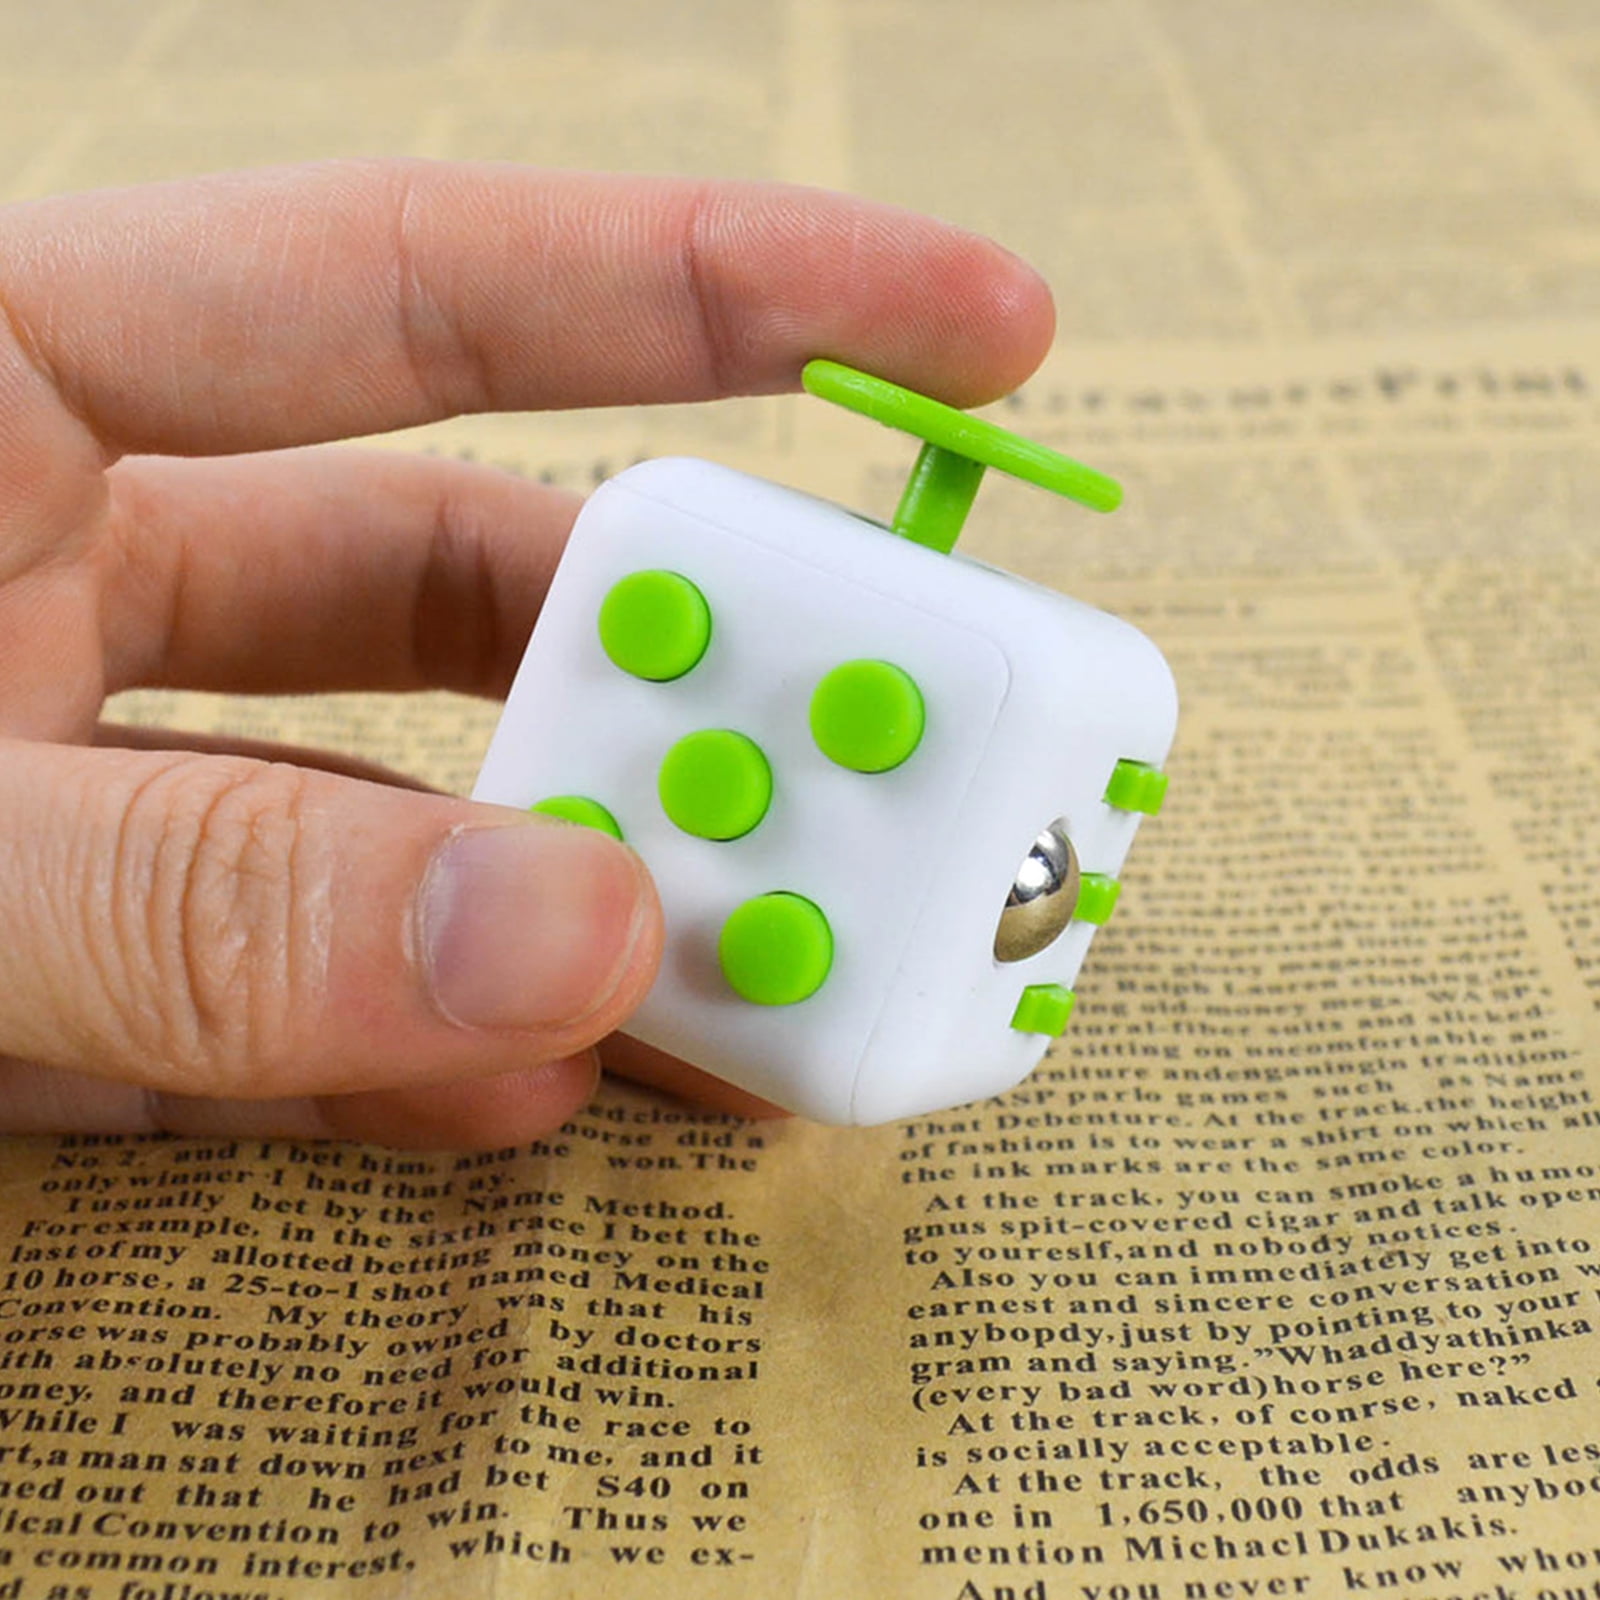 Finger Sensory DE Mini Dice Stress Relief Toy Fidget Anxiety Cube for ADHD 